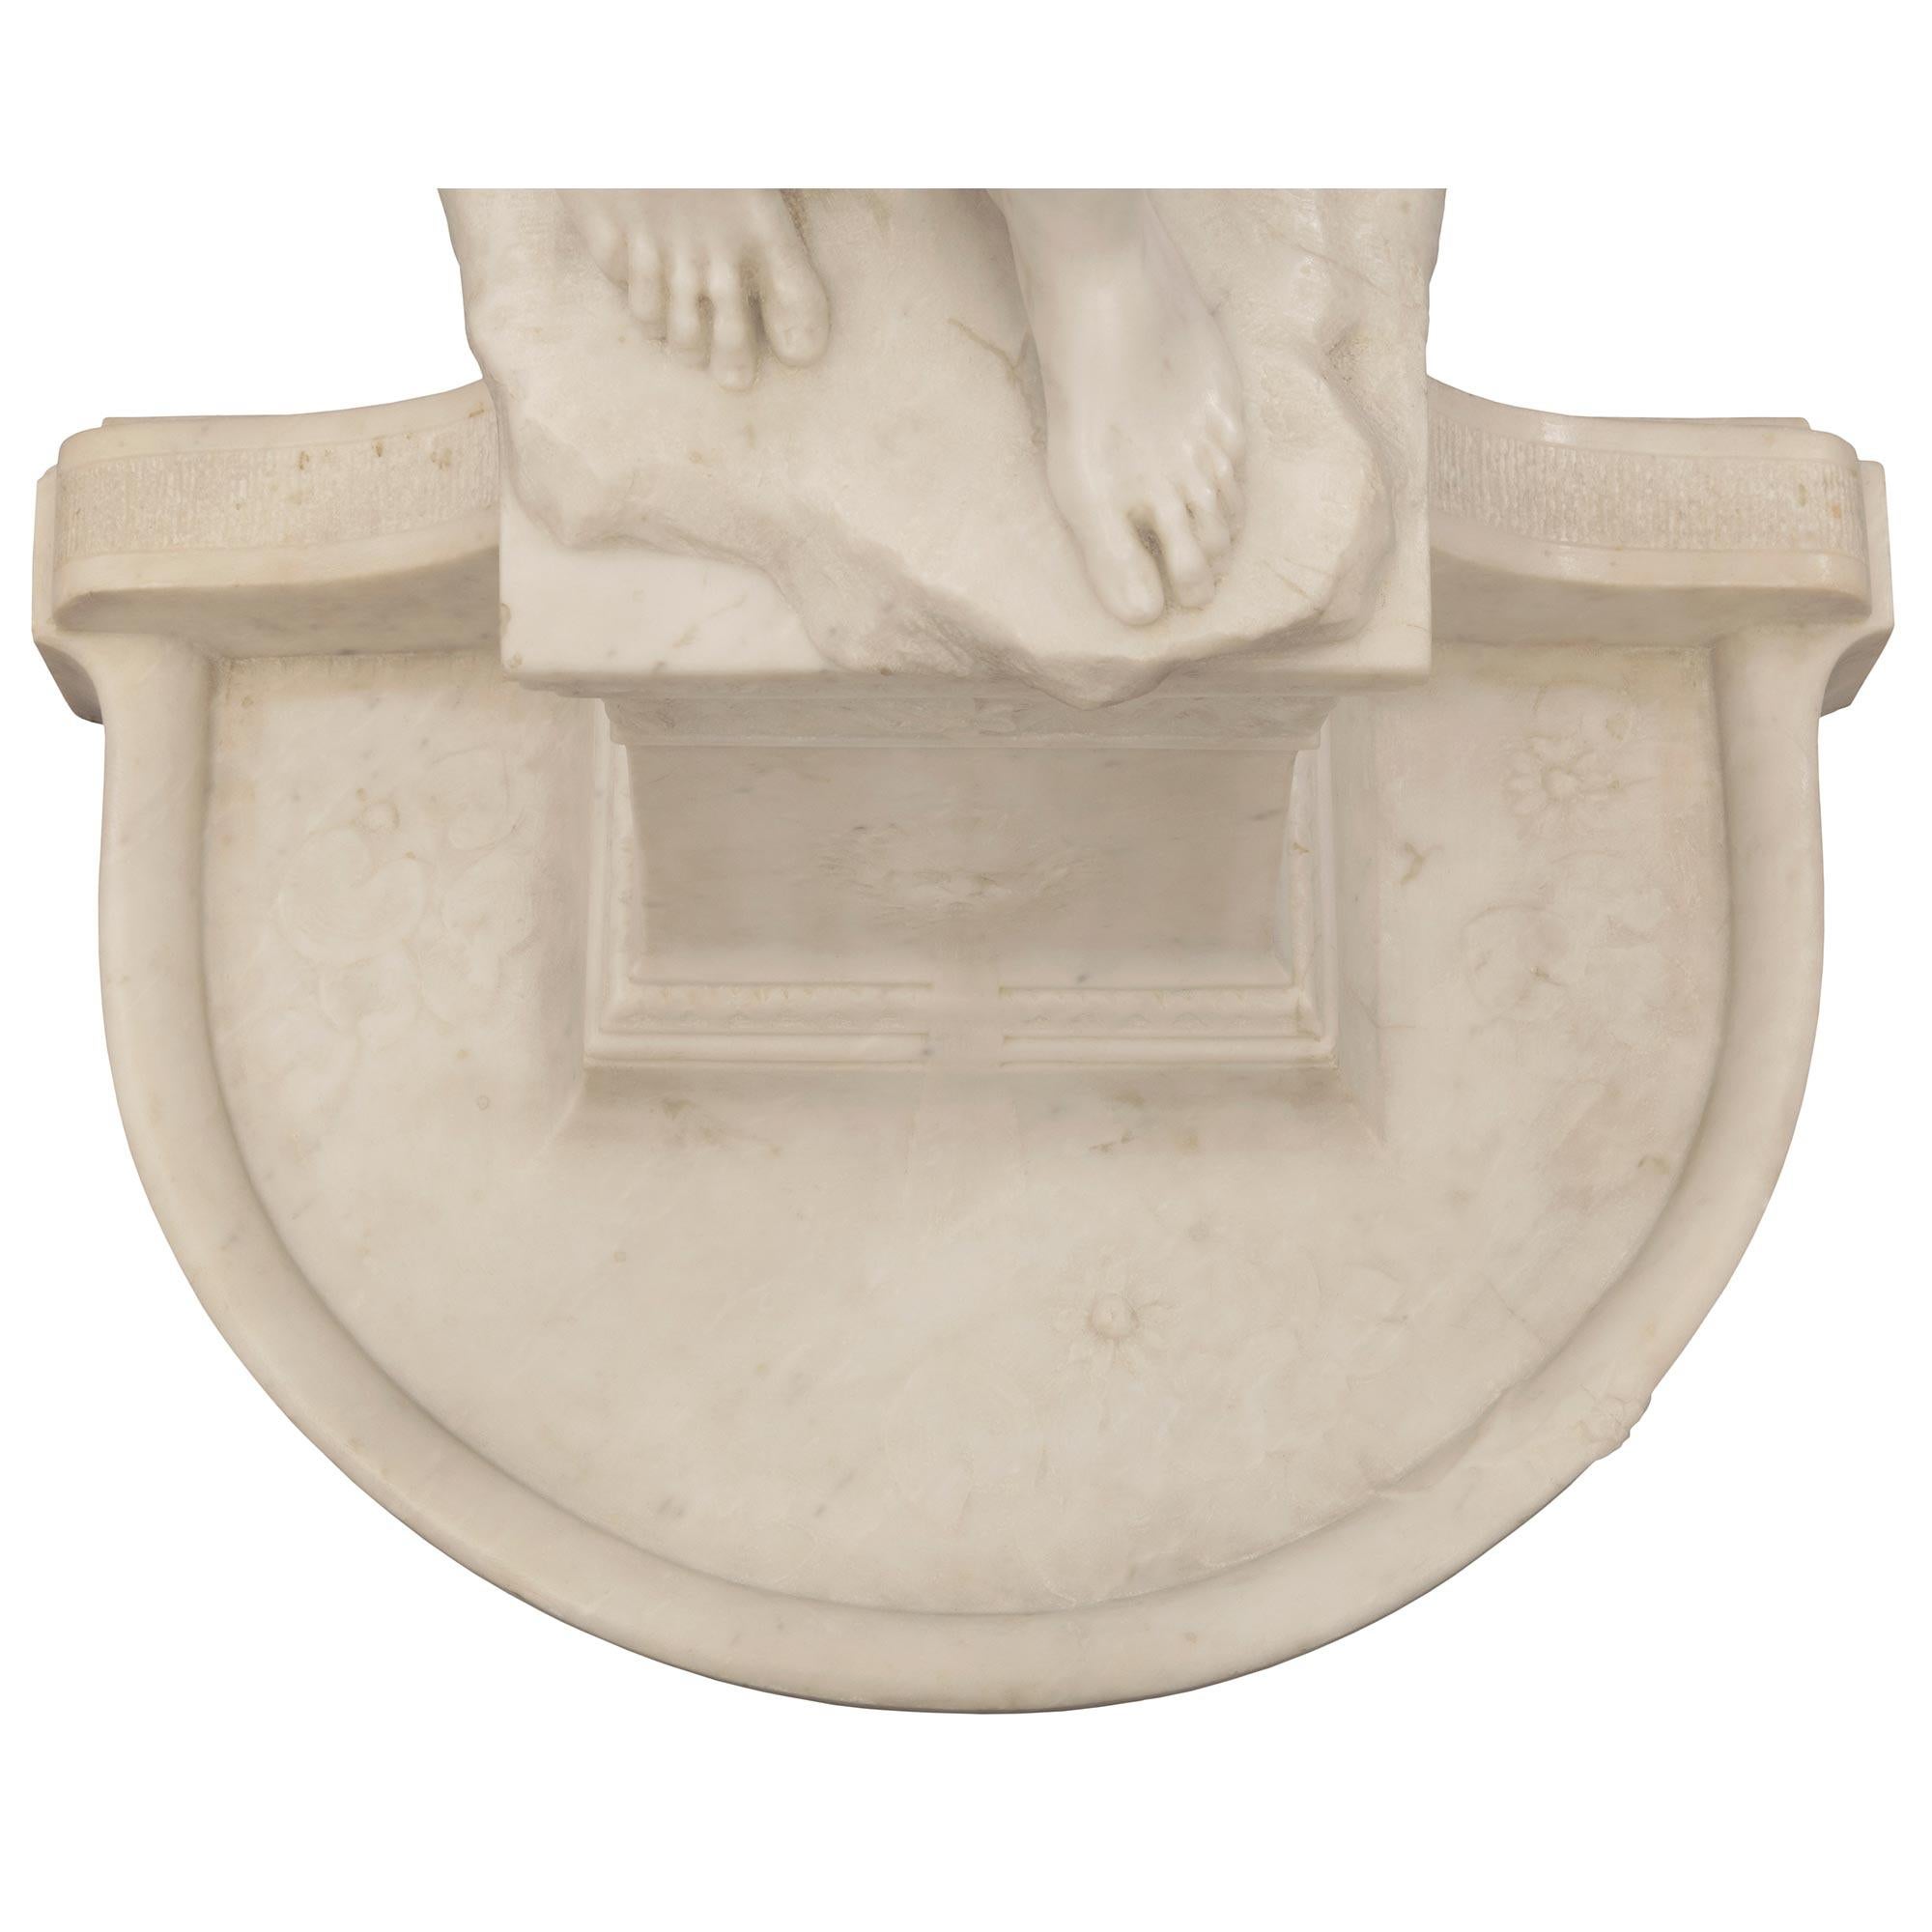 French 19th Century Solid White Carrara Marble Statue/Basin For Sale 8